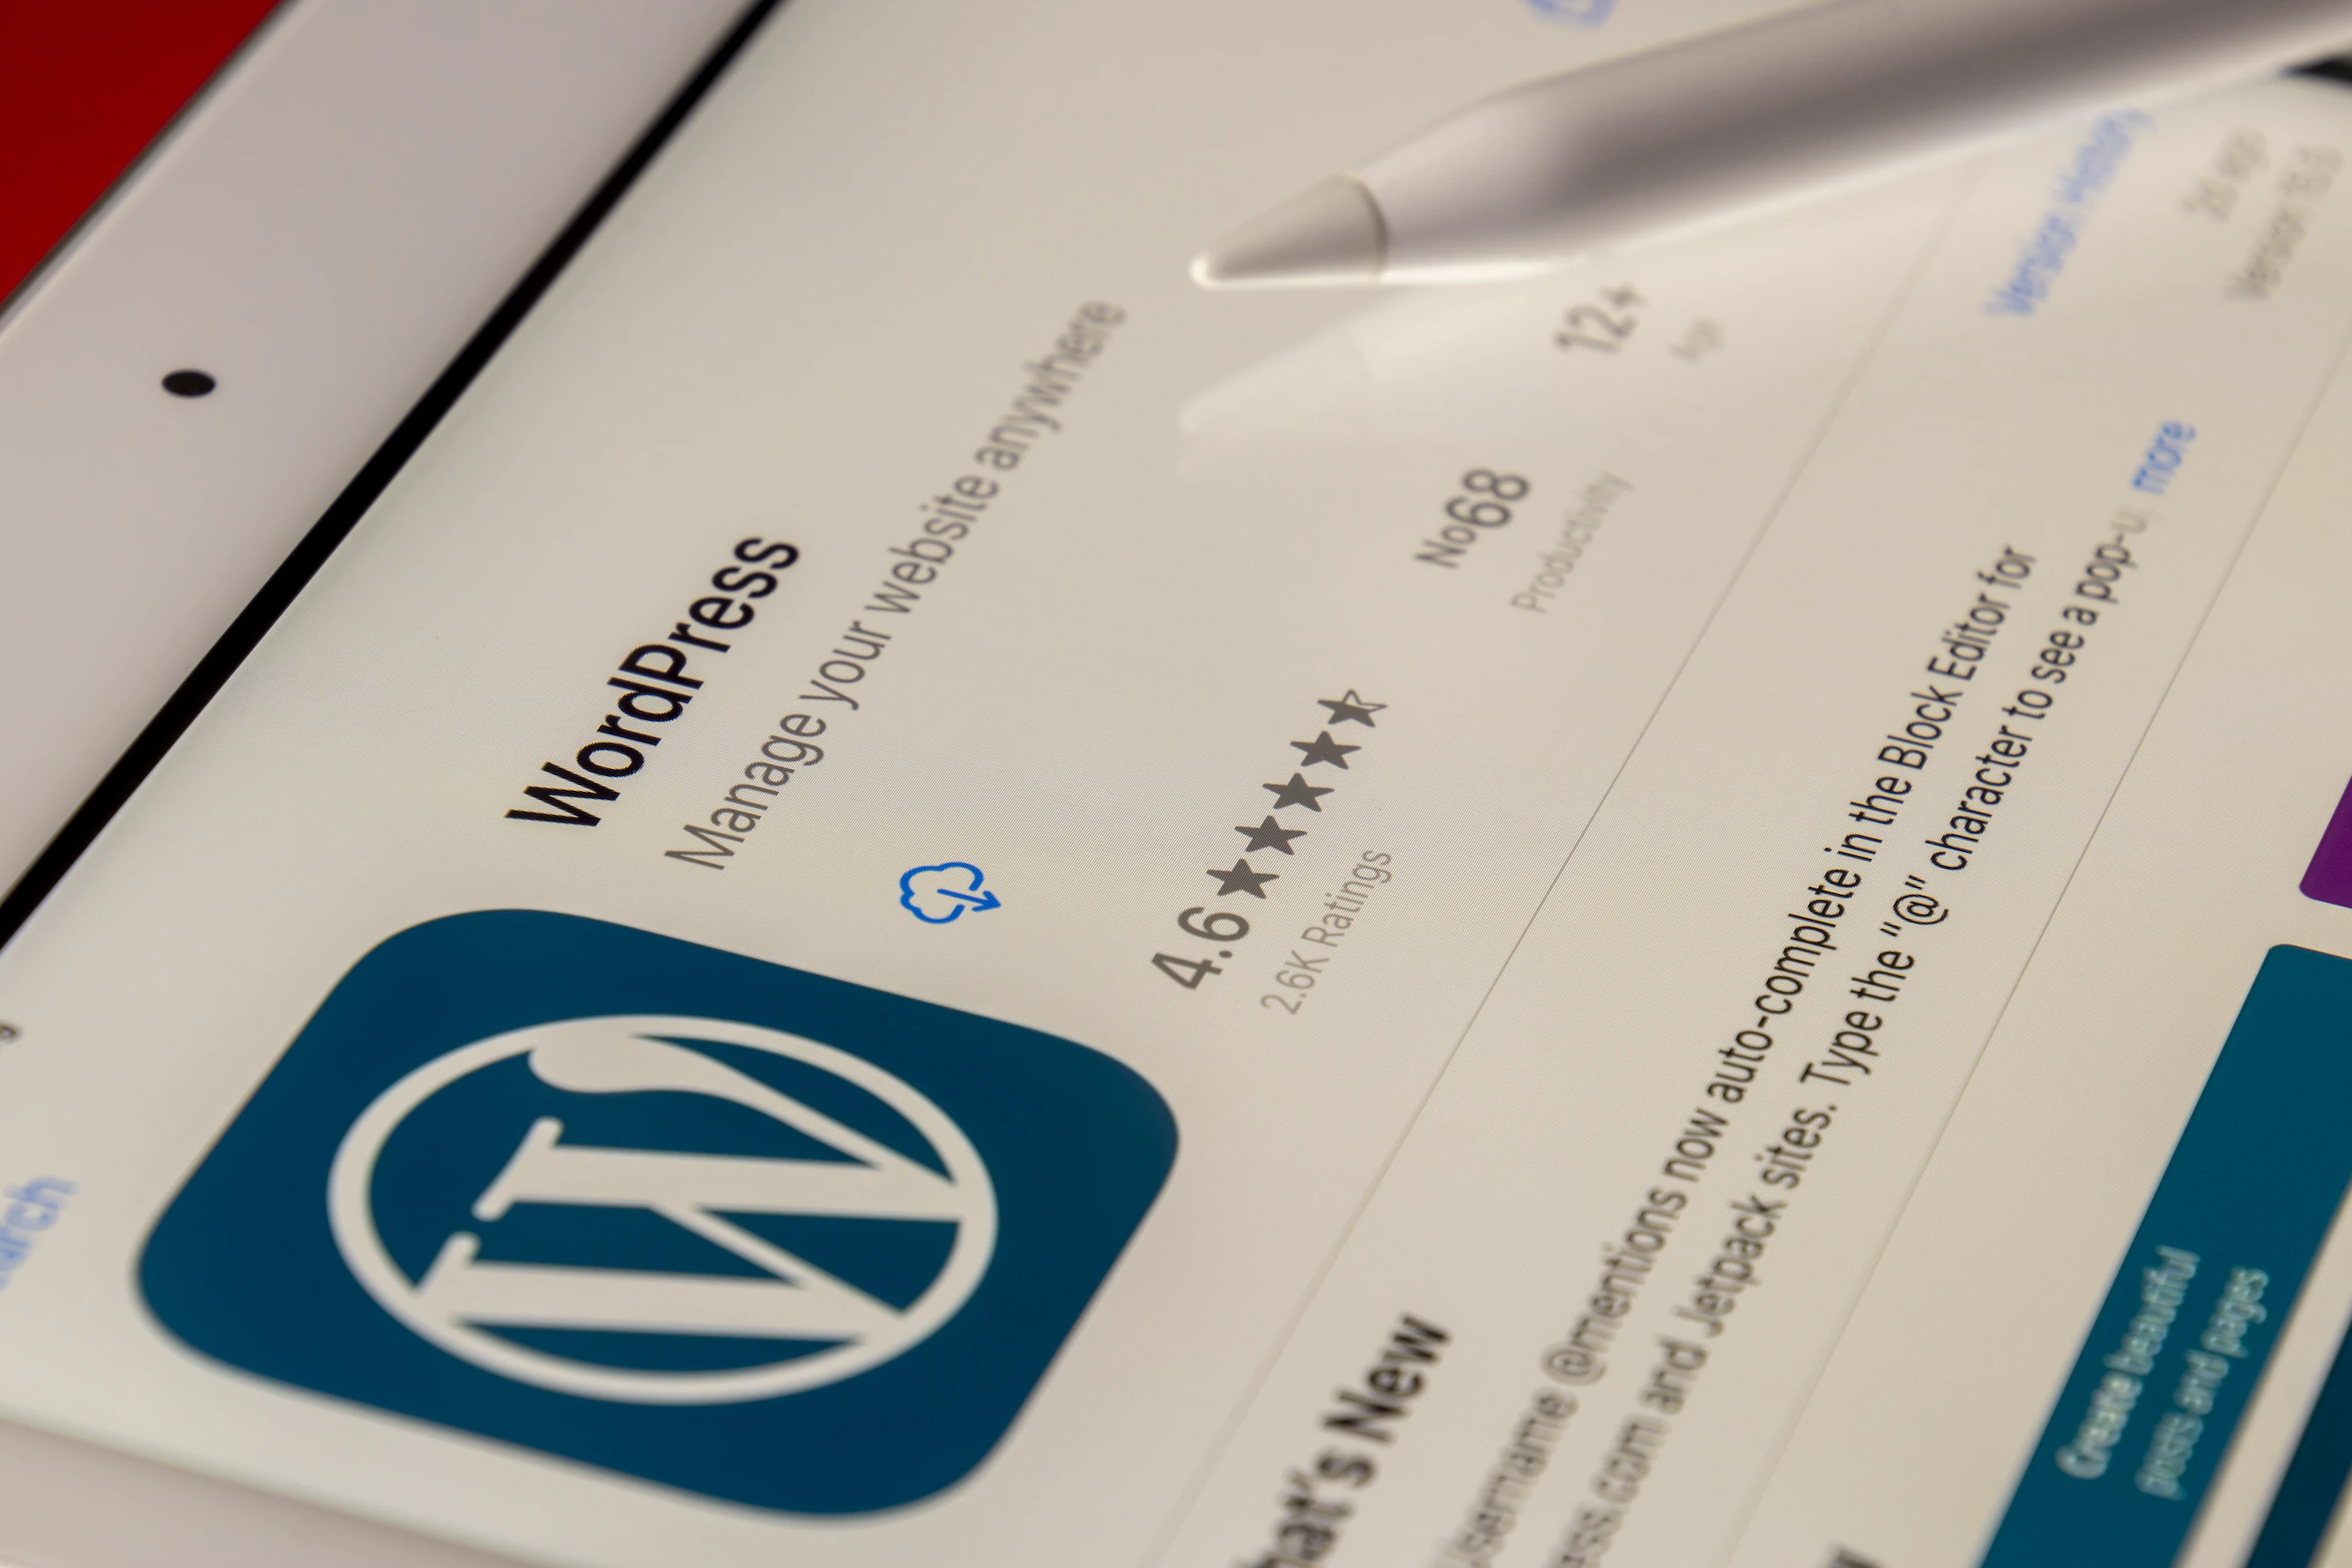 5 best wordpress themes, mobile web page